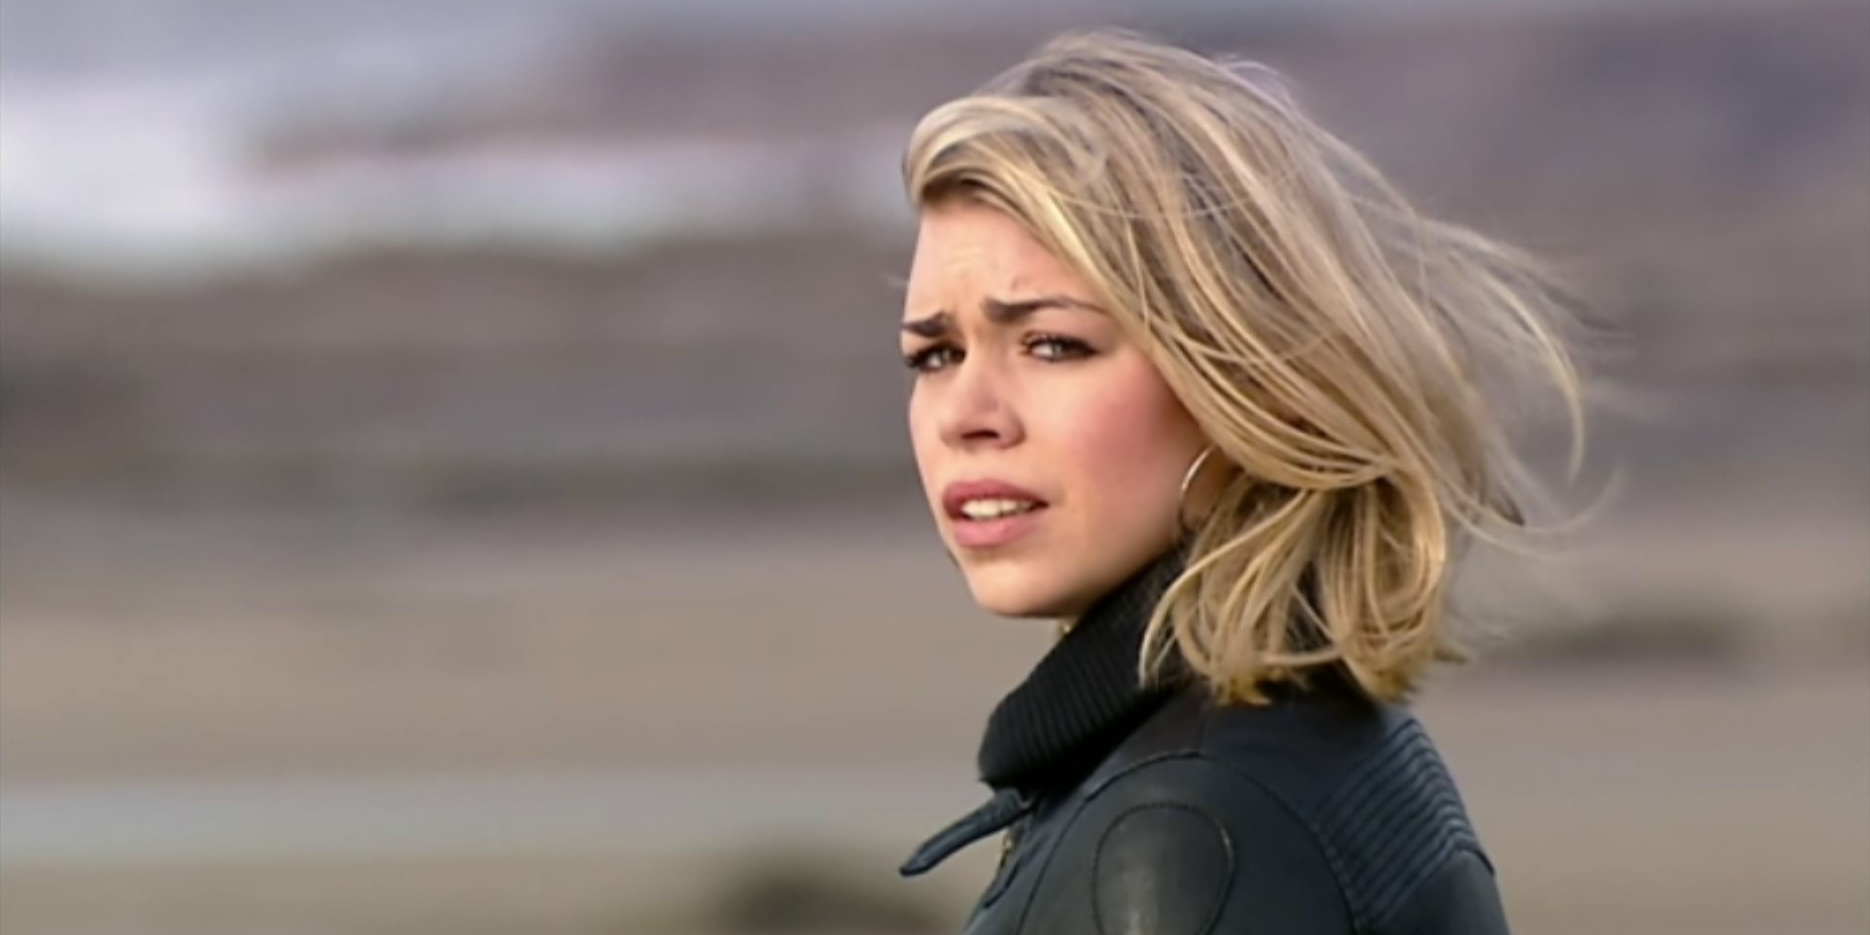 Billie Piper as Rose Tyler in 'Doomsday' episode of Doctor Who